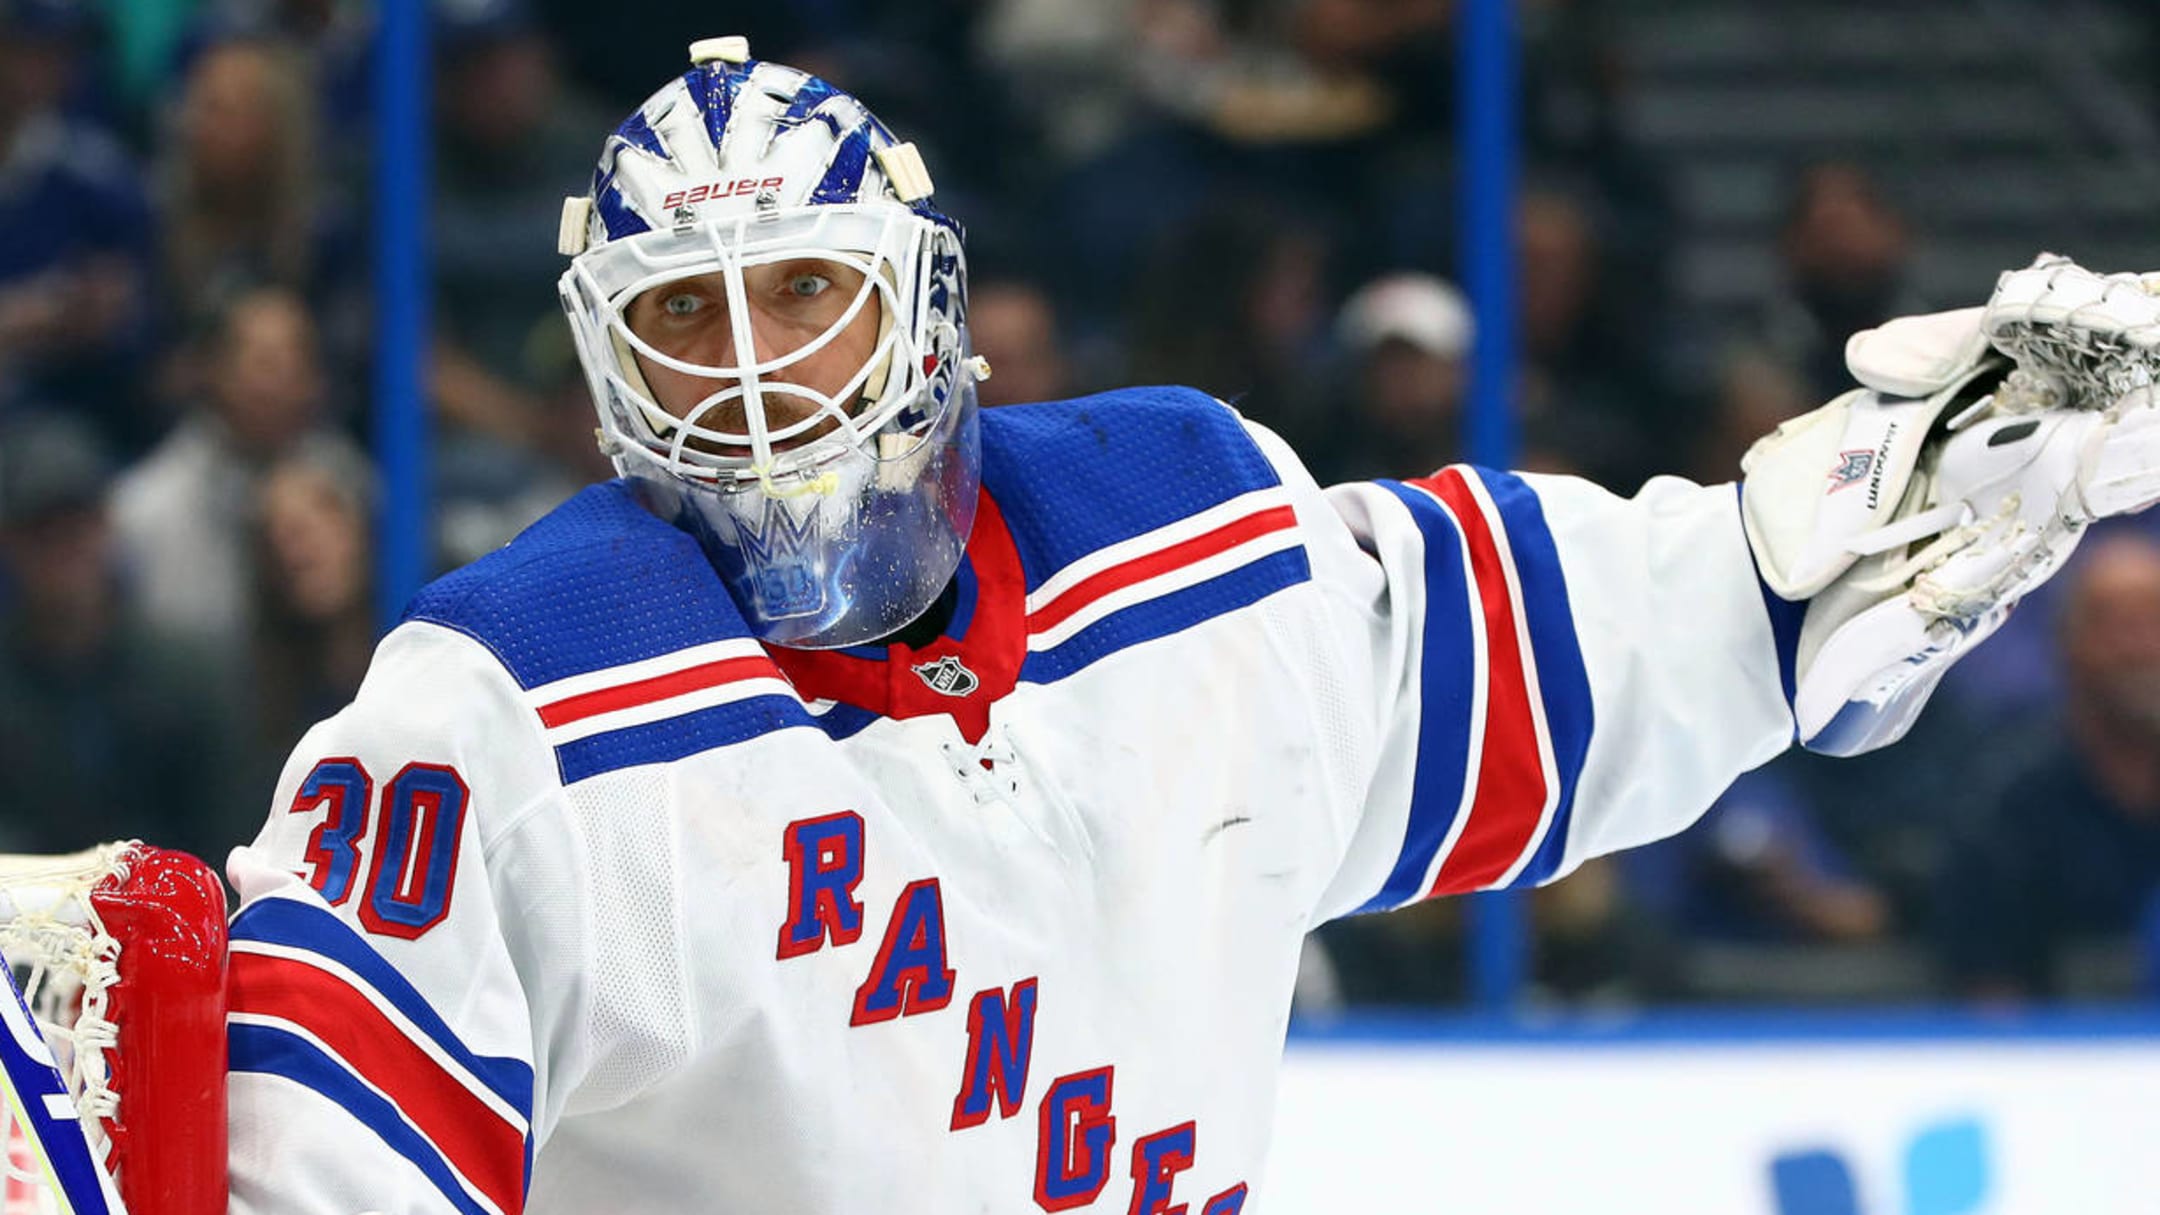 Henrik Lundqvist won't play with Washington Capitals this season due to  heart condition